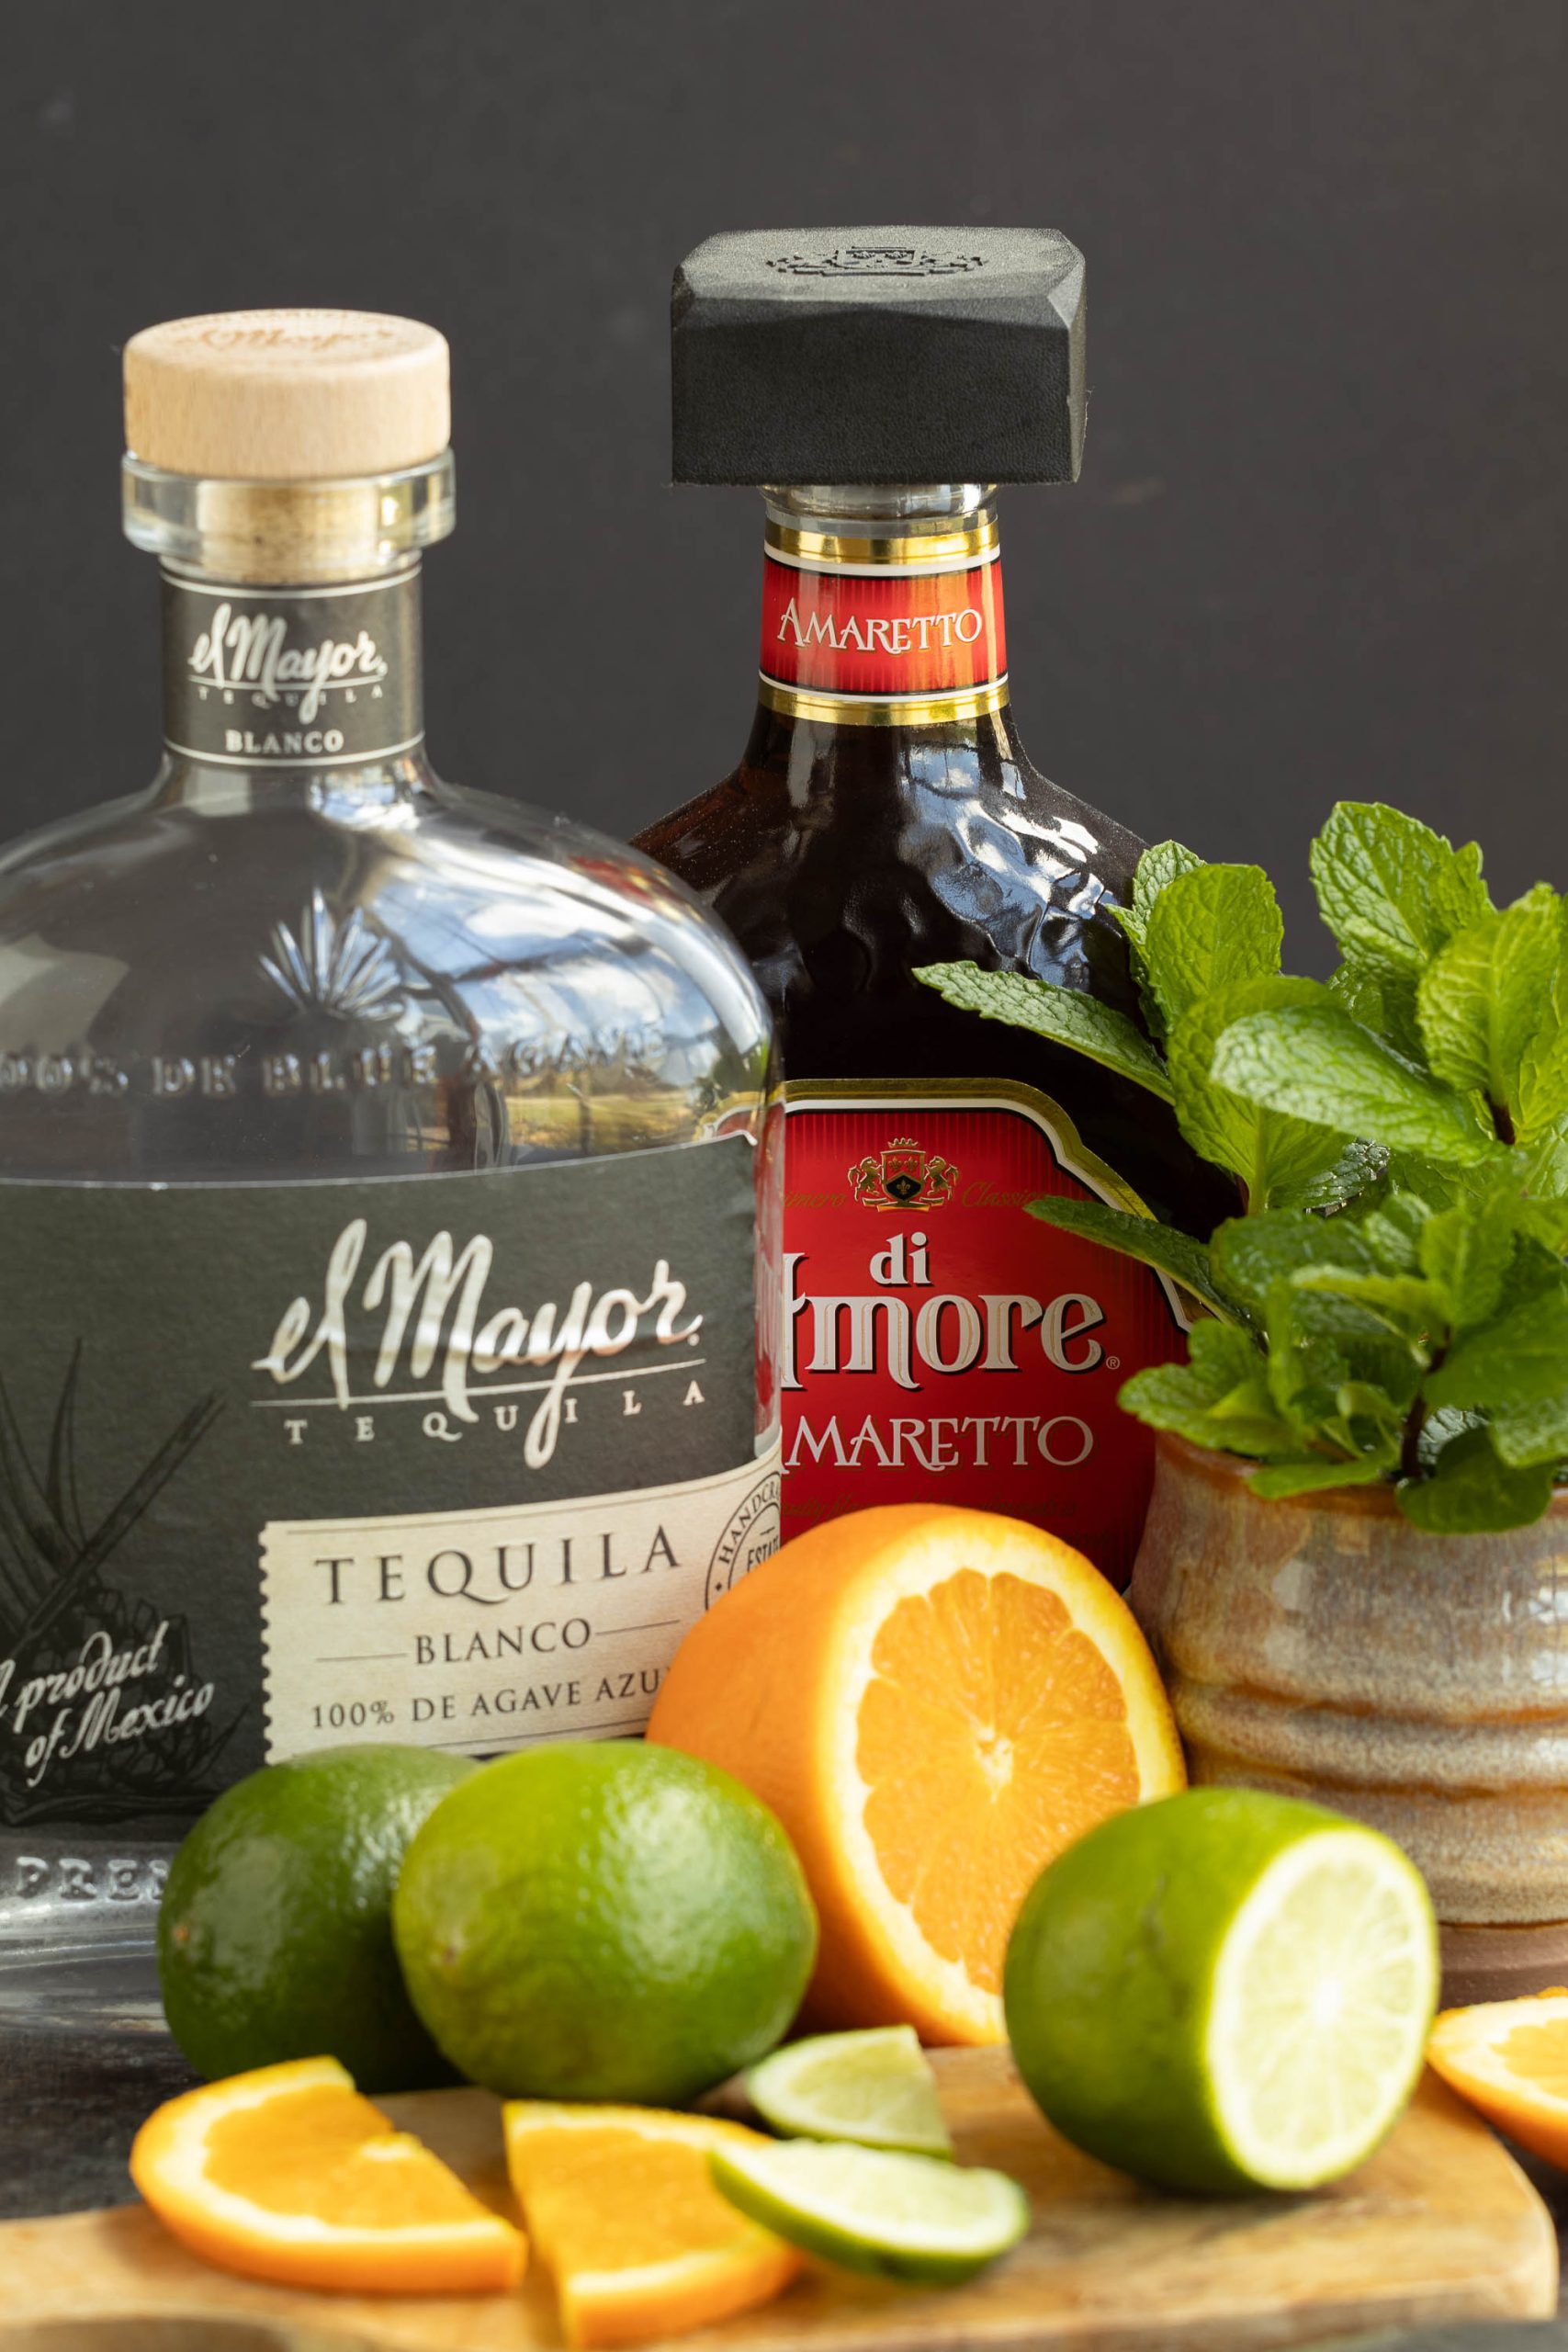 Bottles of el mayor blanco tequila and amaretto di amore with fresh citrus and mint leaves.